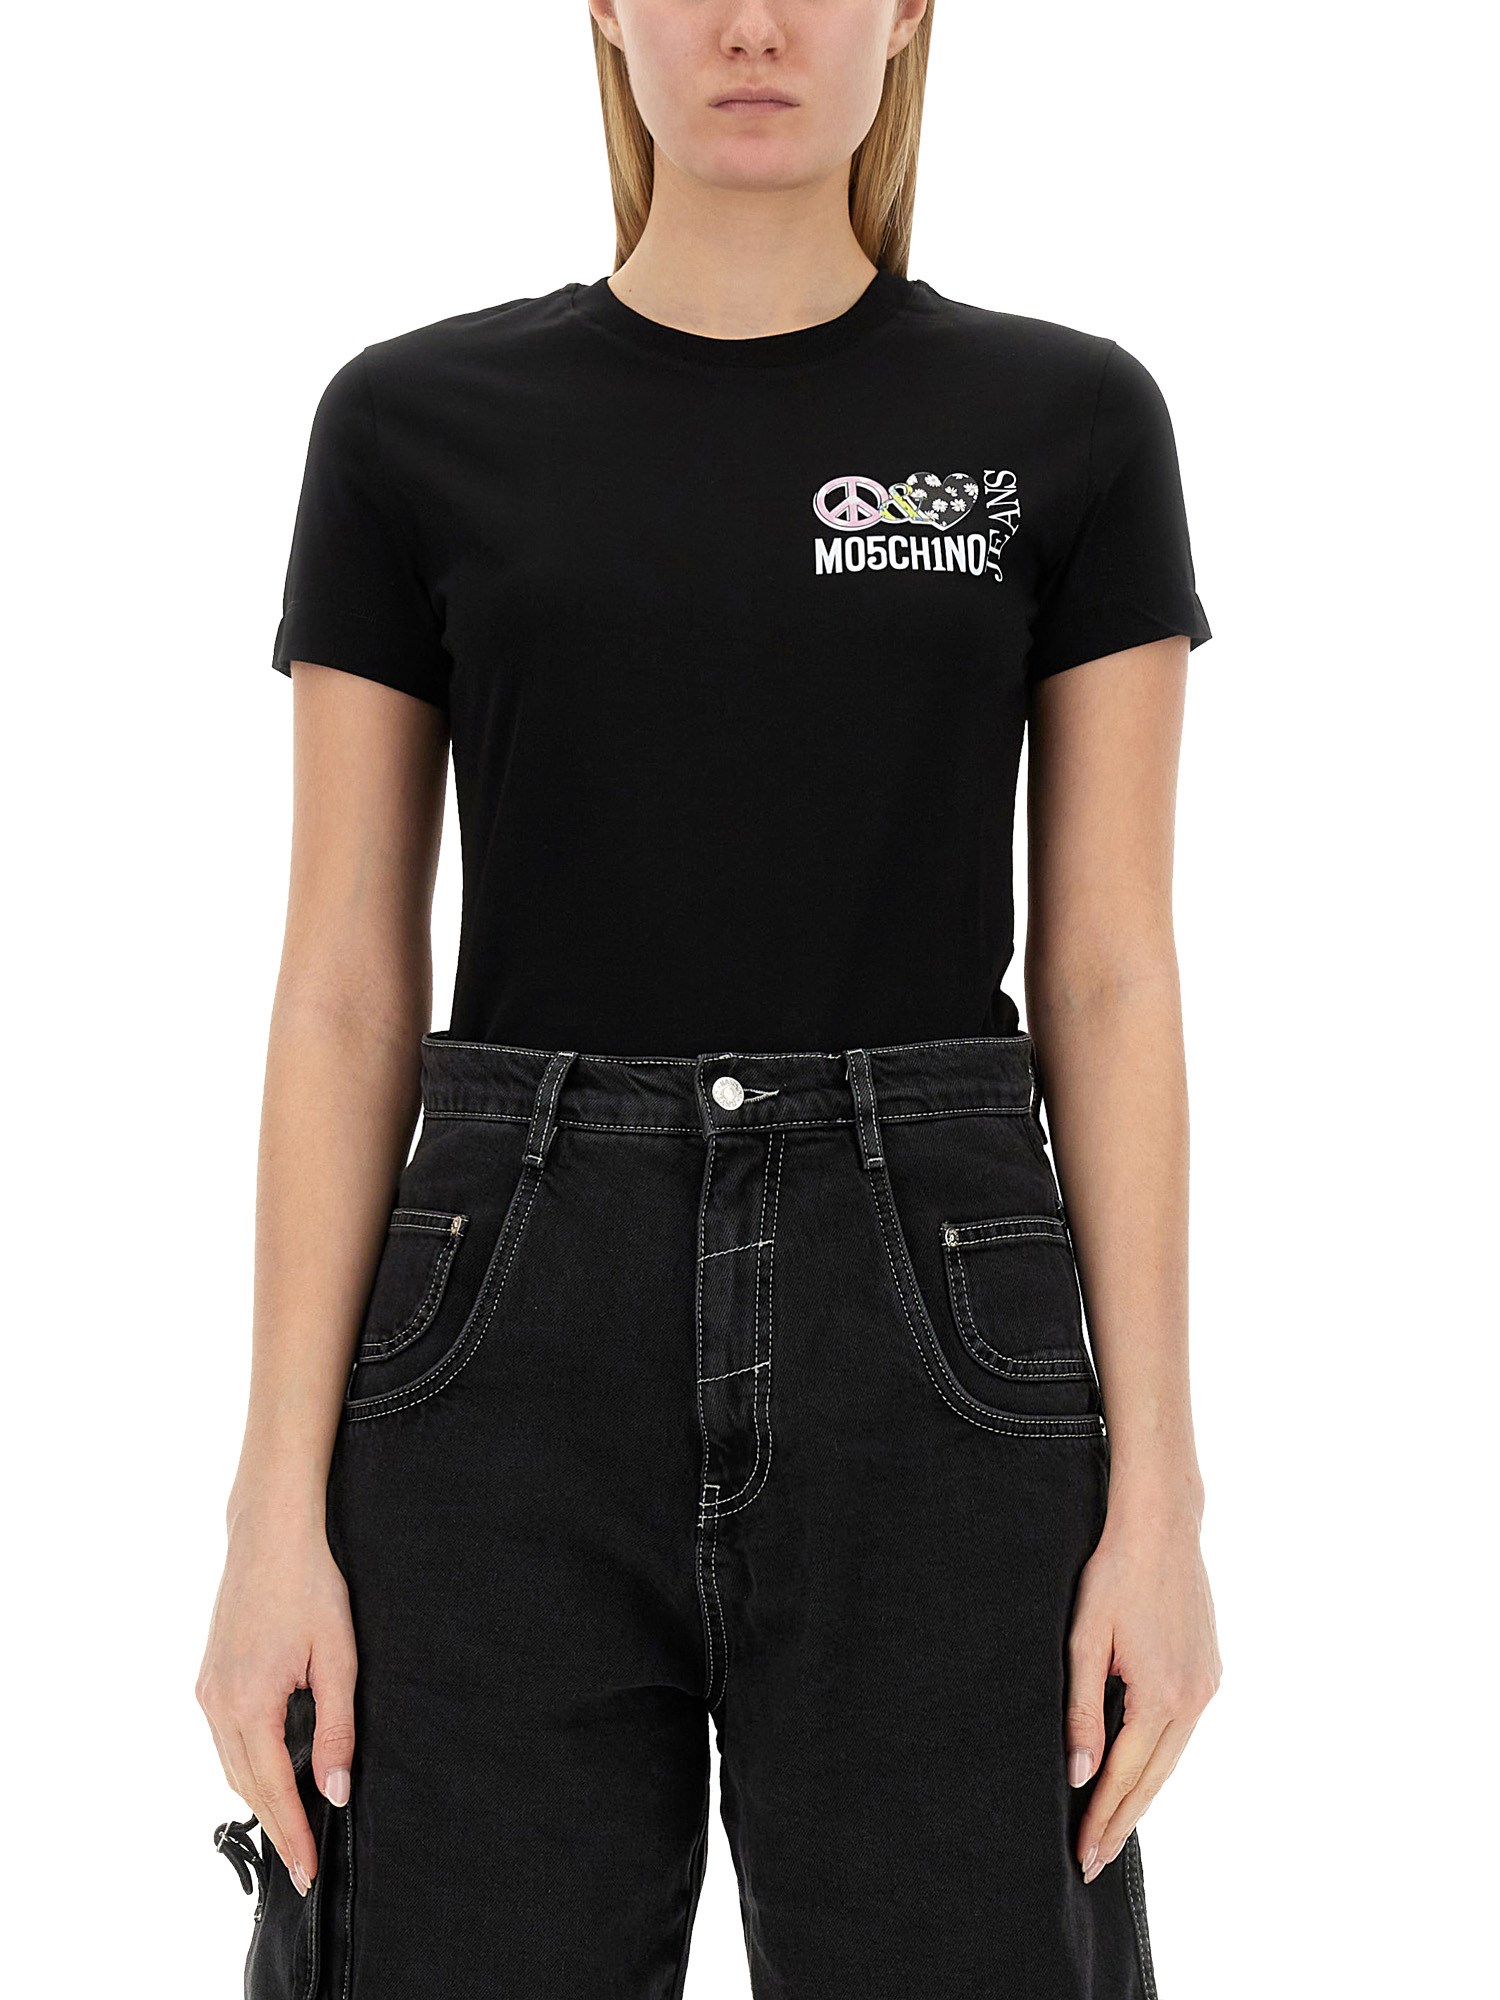 Moschino Jeans moschino jeans t-shirt with logo